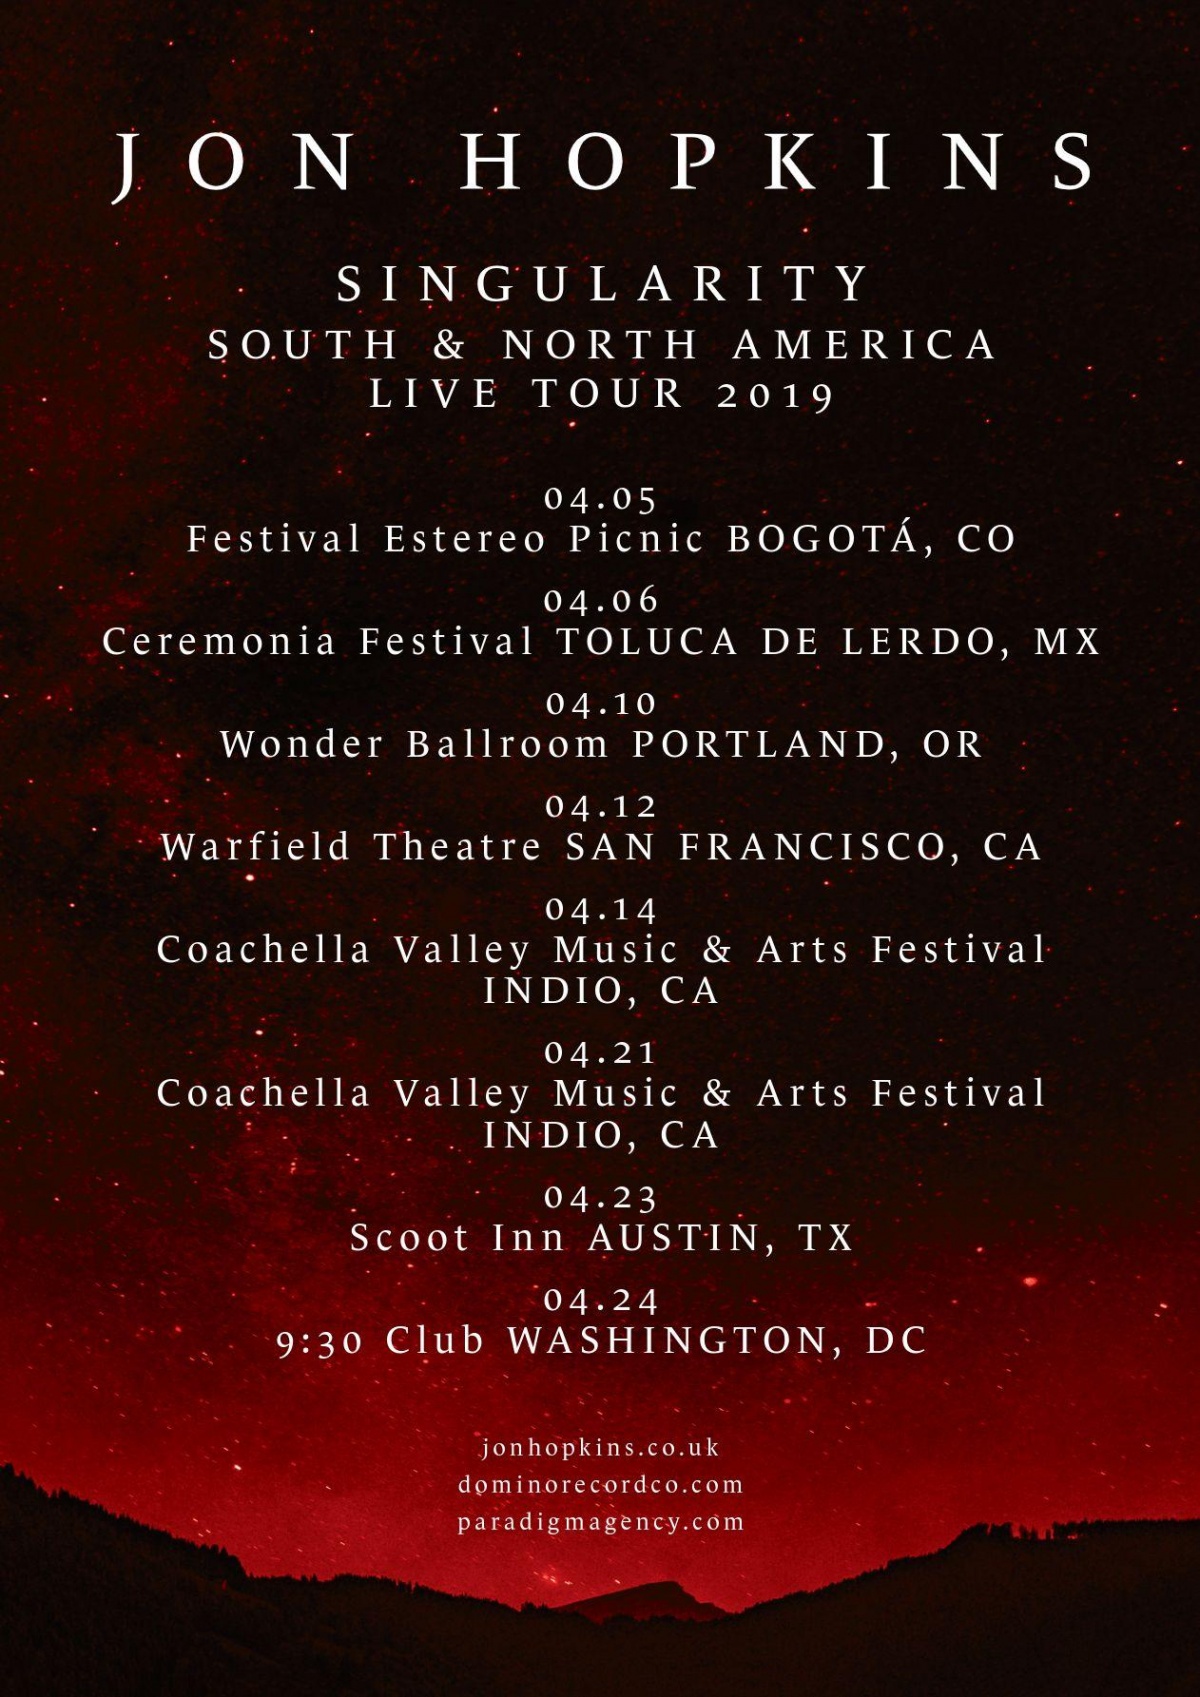 April tour dates for North and South America